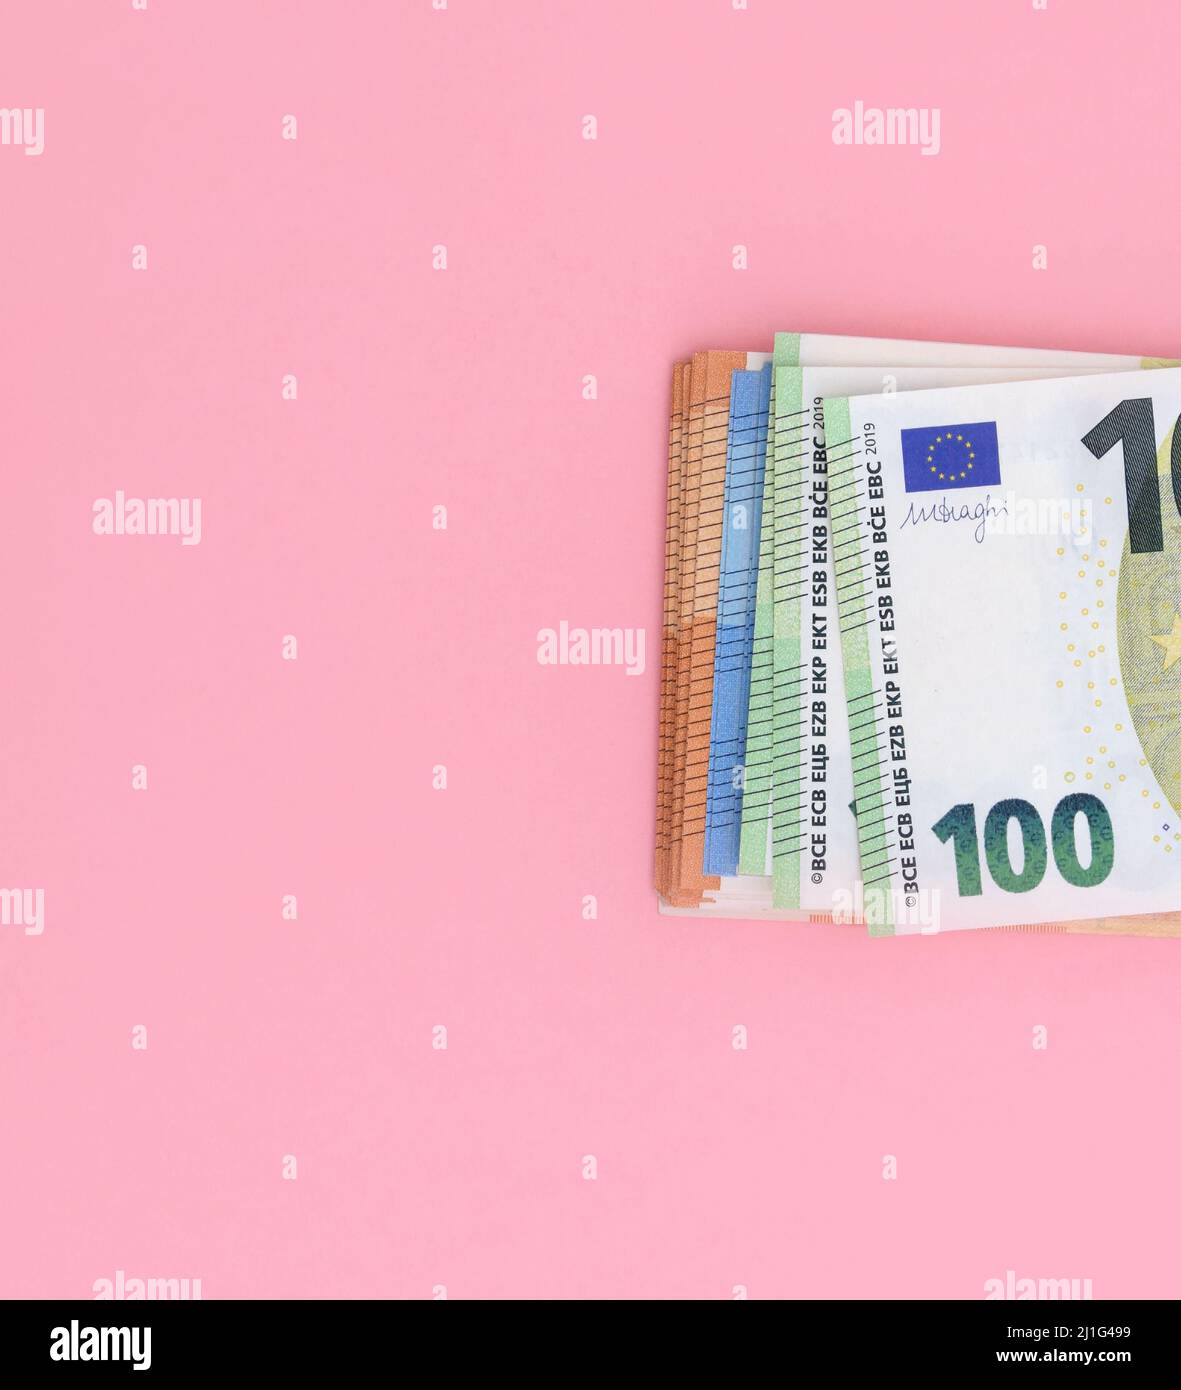 Pack of euro banknotes on pink background. European currency, business, finance Stock Photo